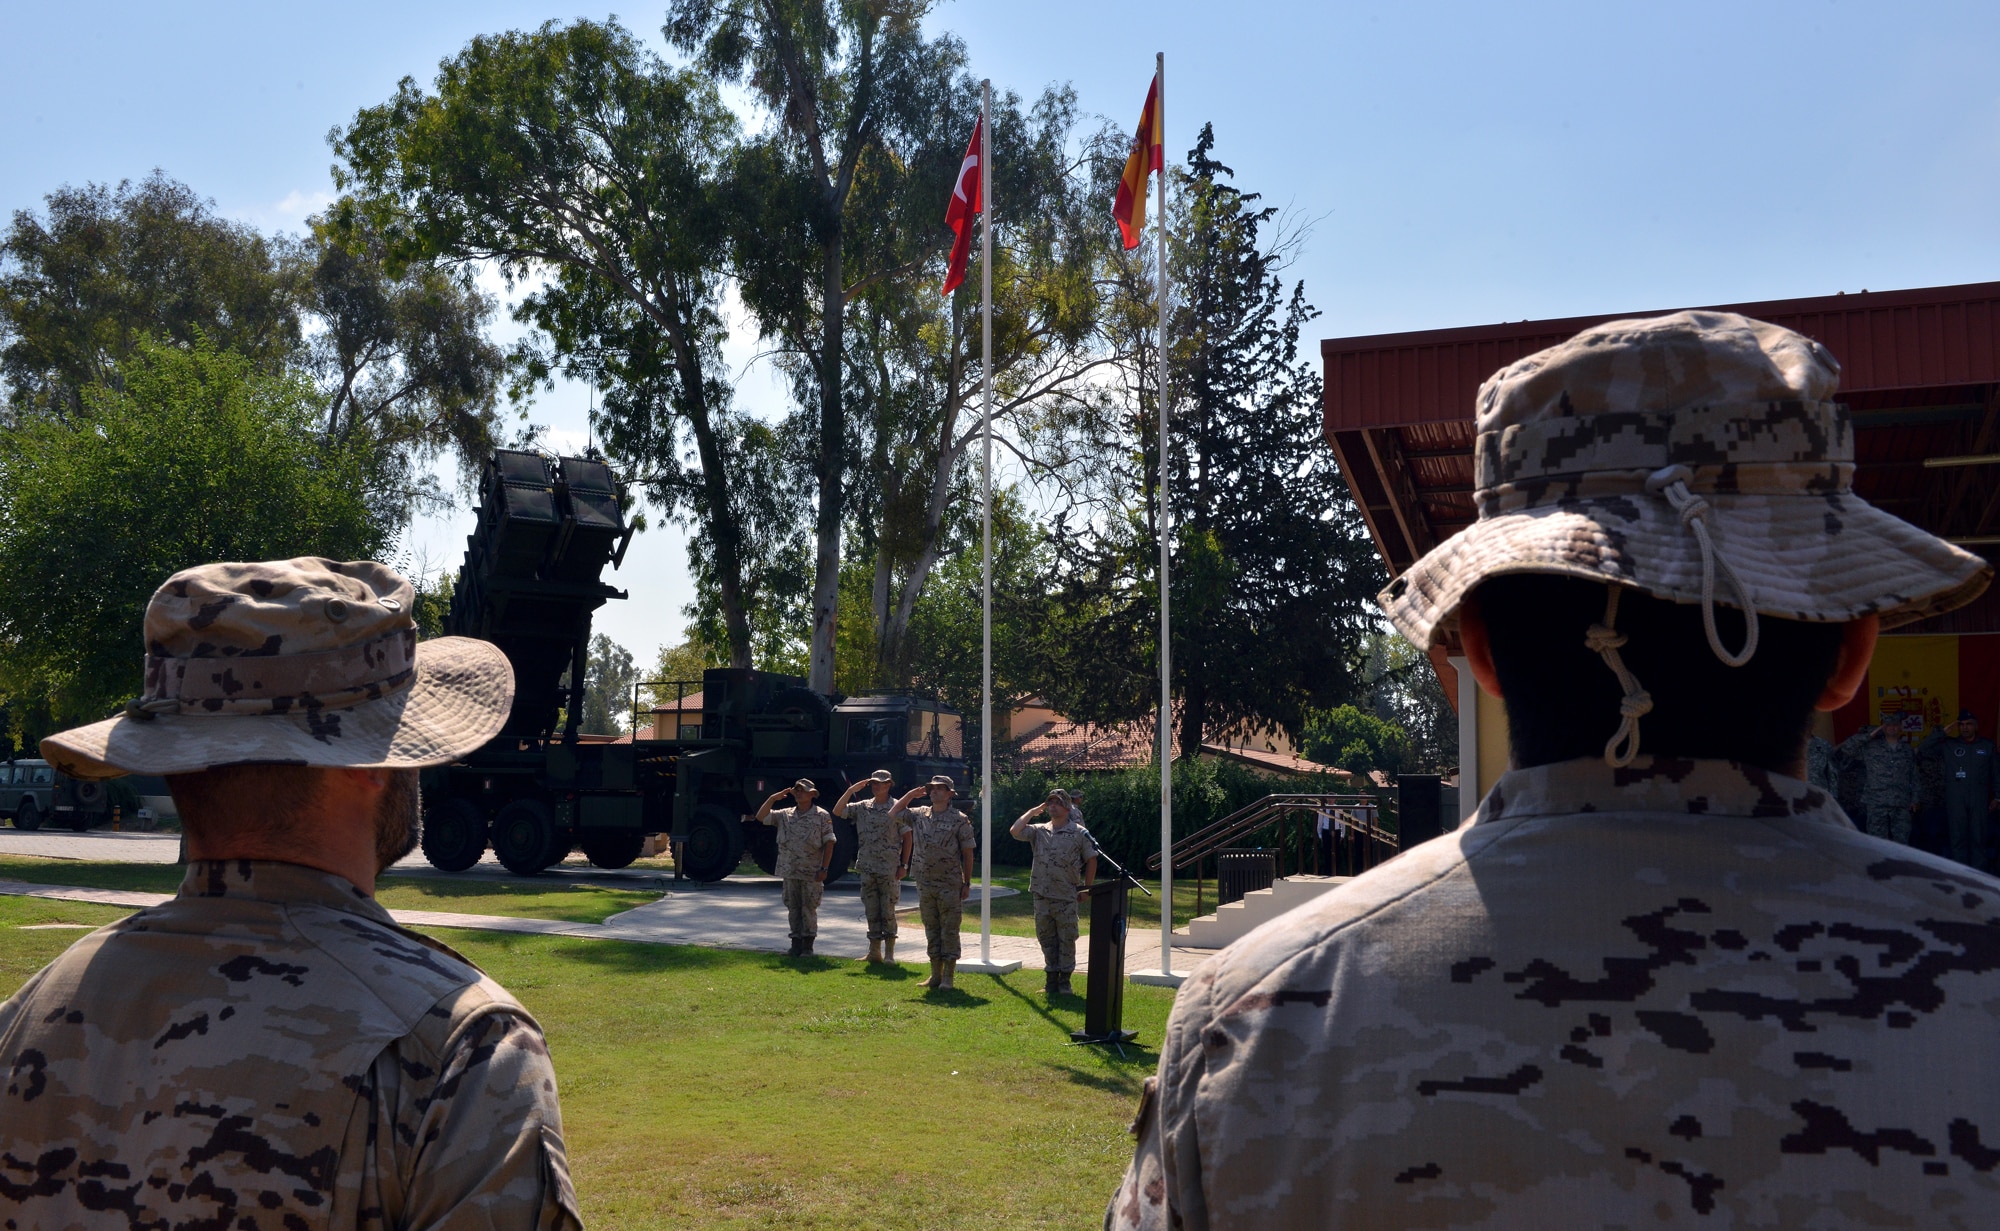 Leaders from the Spanish military salute the flag during the playing of the Turkish and Spanish national anthems during a Transfer of Authority ceremony July 22, 2015, at Incirlik Air Base, Turkey. NATO allies from Spain, Turkey, Germany and the U.S. were in attendance at the ceremony. (U.S. Air Force photo by Senior Airman Michael Battles/Released))